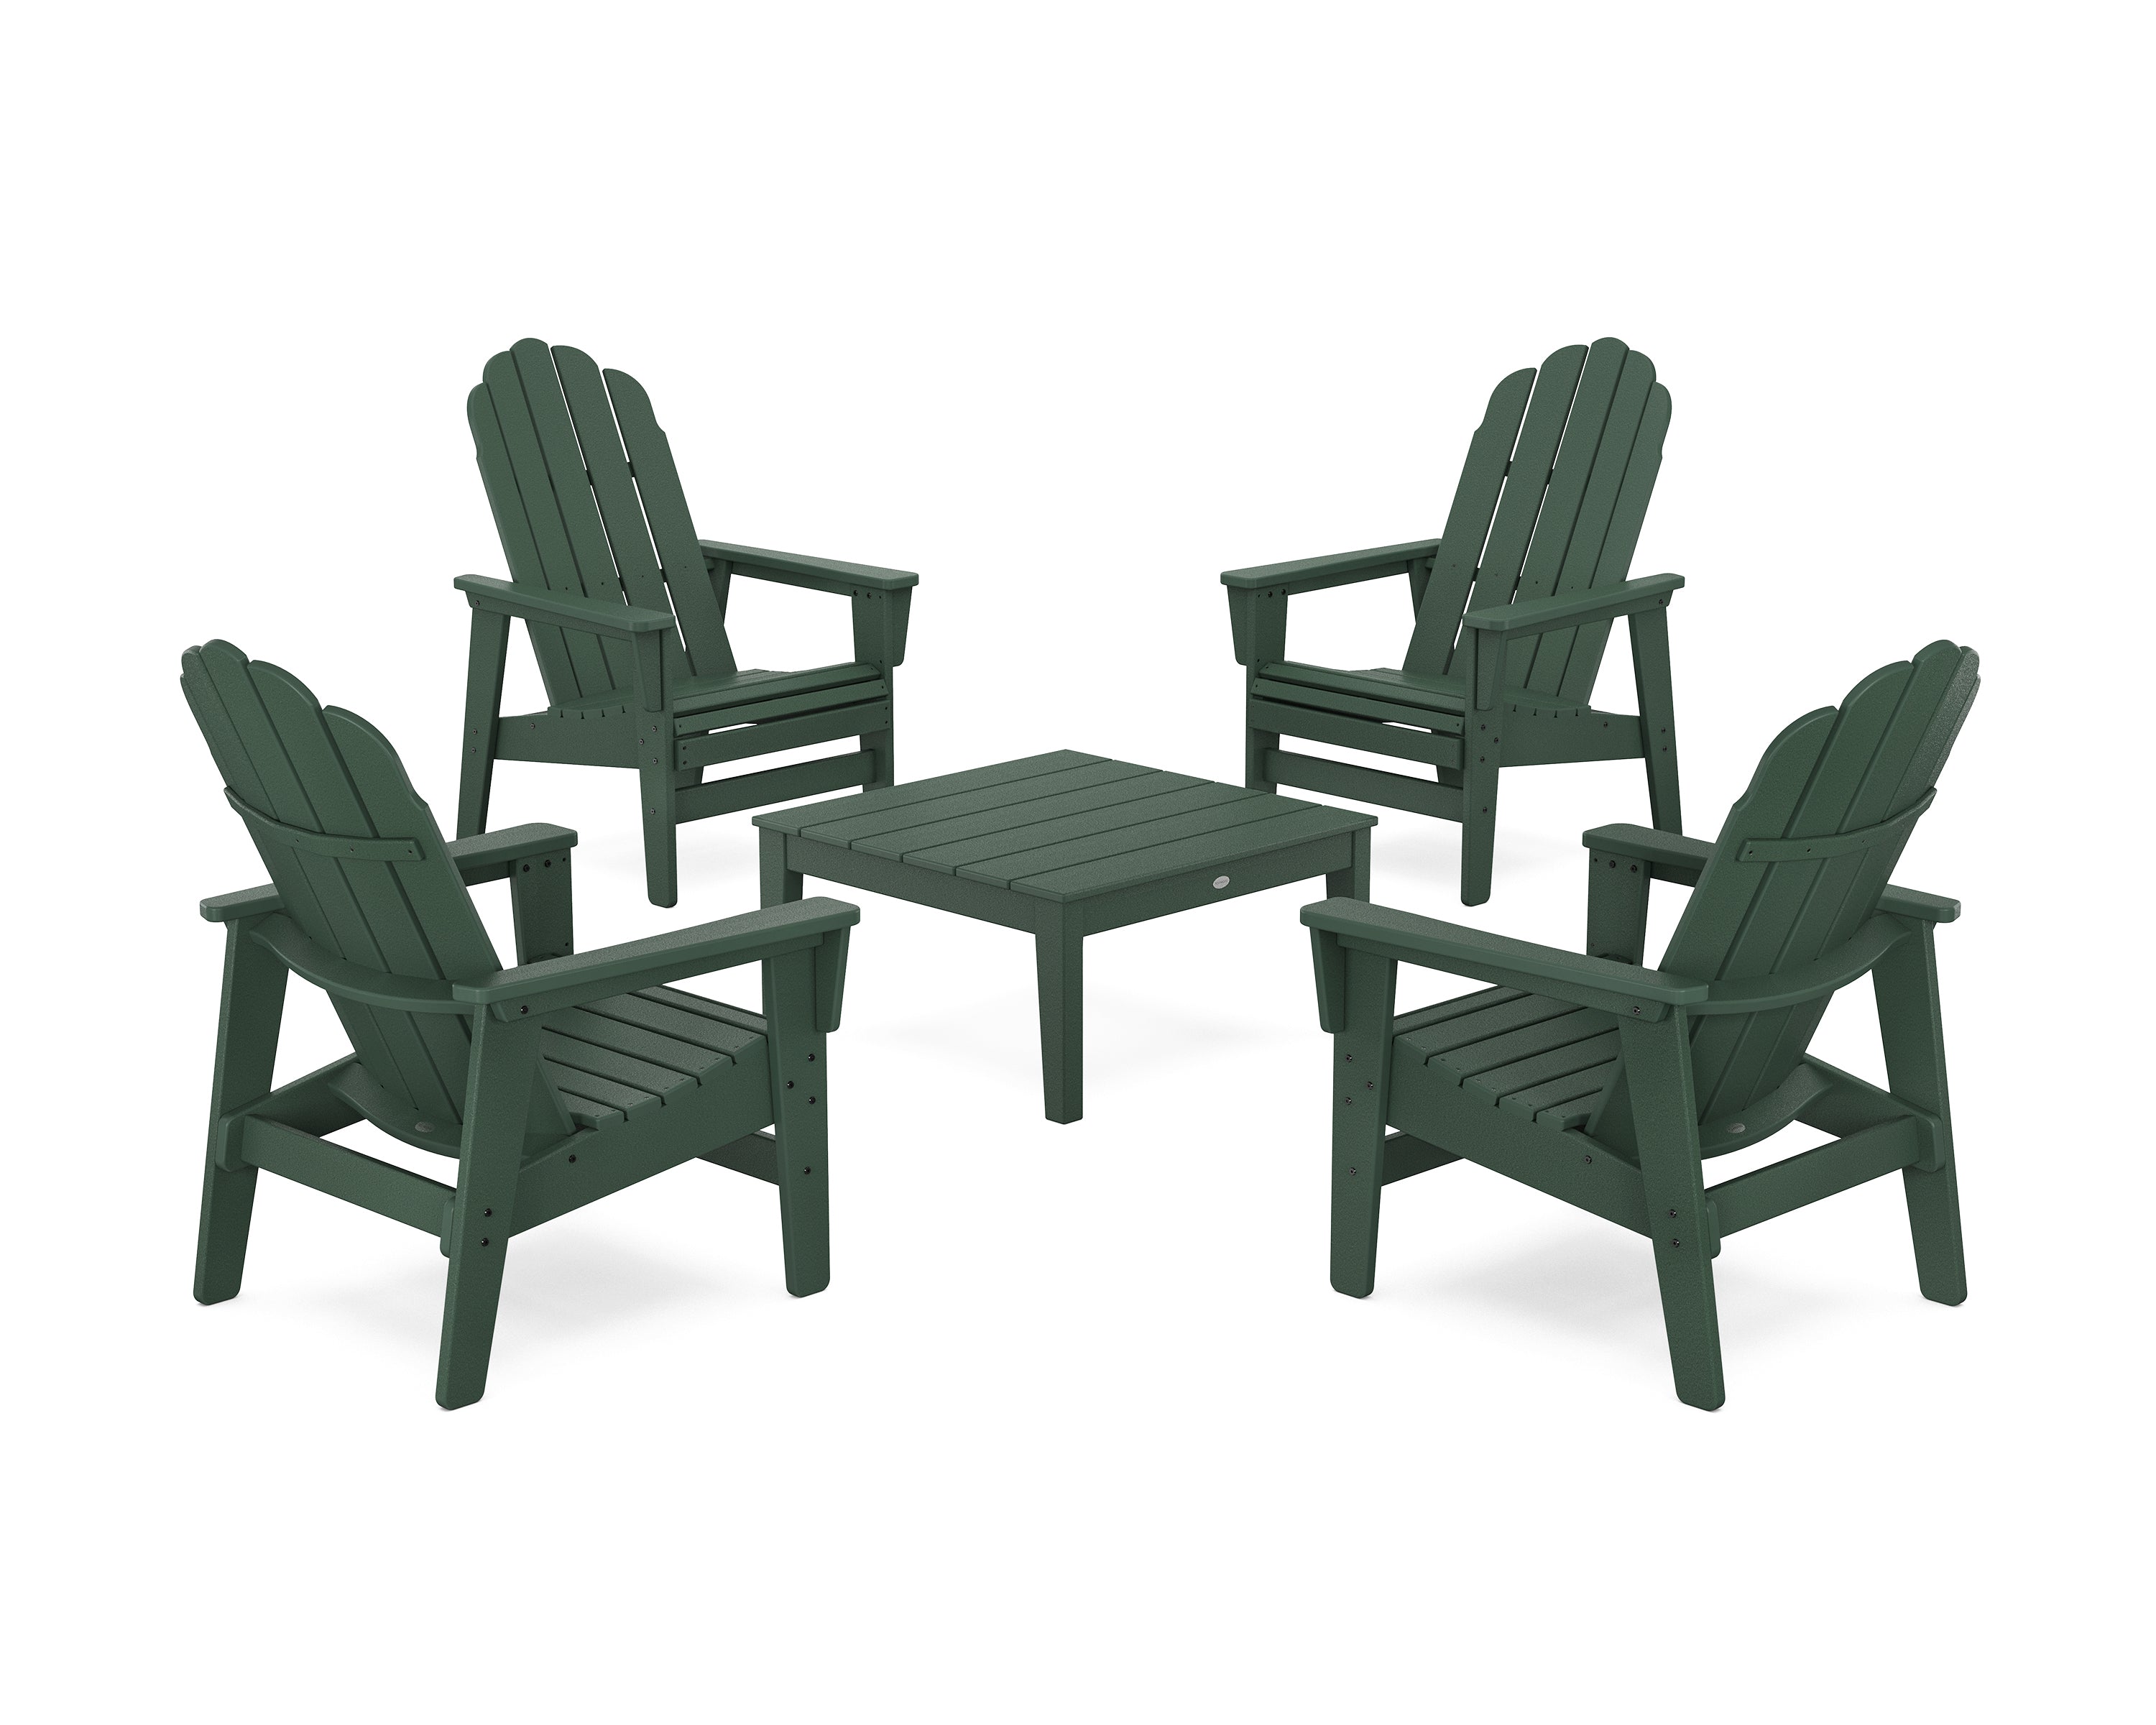 POLYWOOD® 5-Piece Vineyard Grand Upright Adirondack Chair Conversation Group in Green